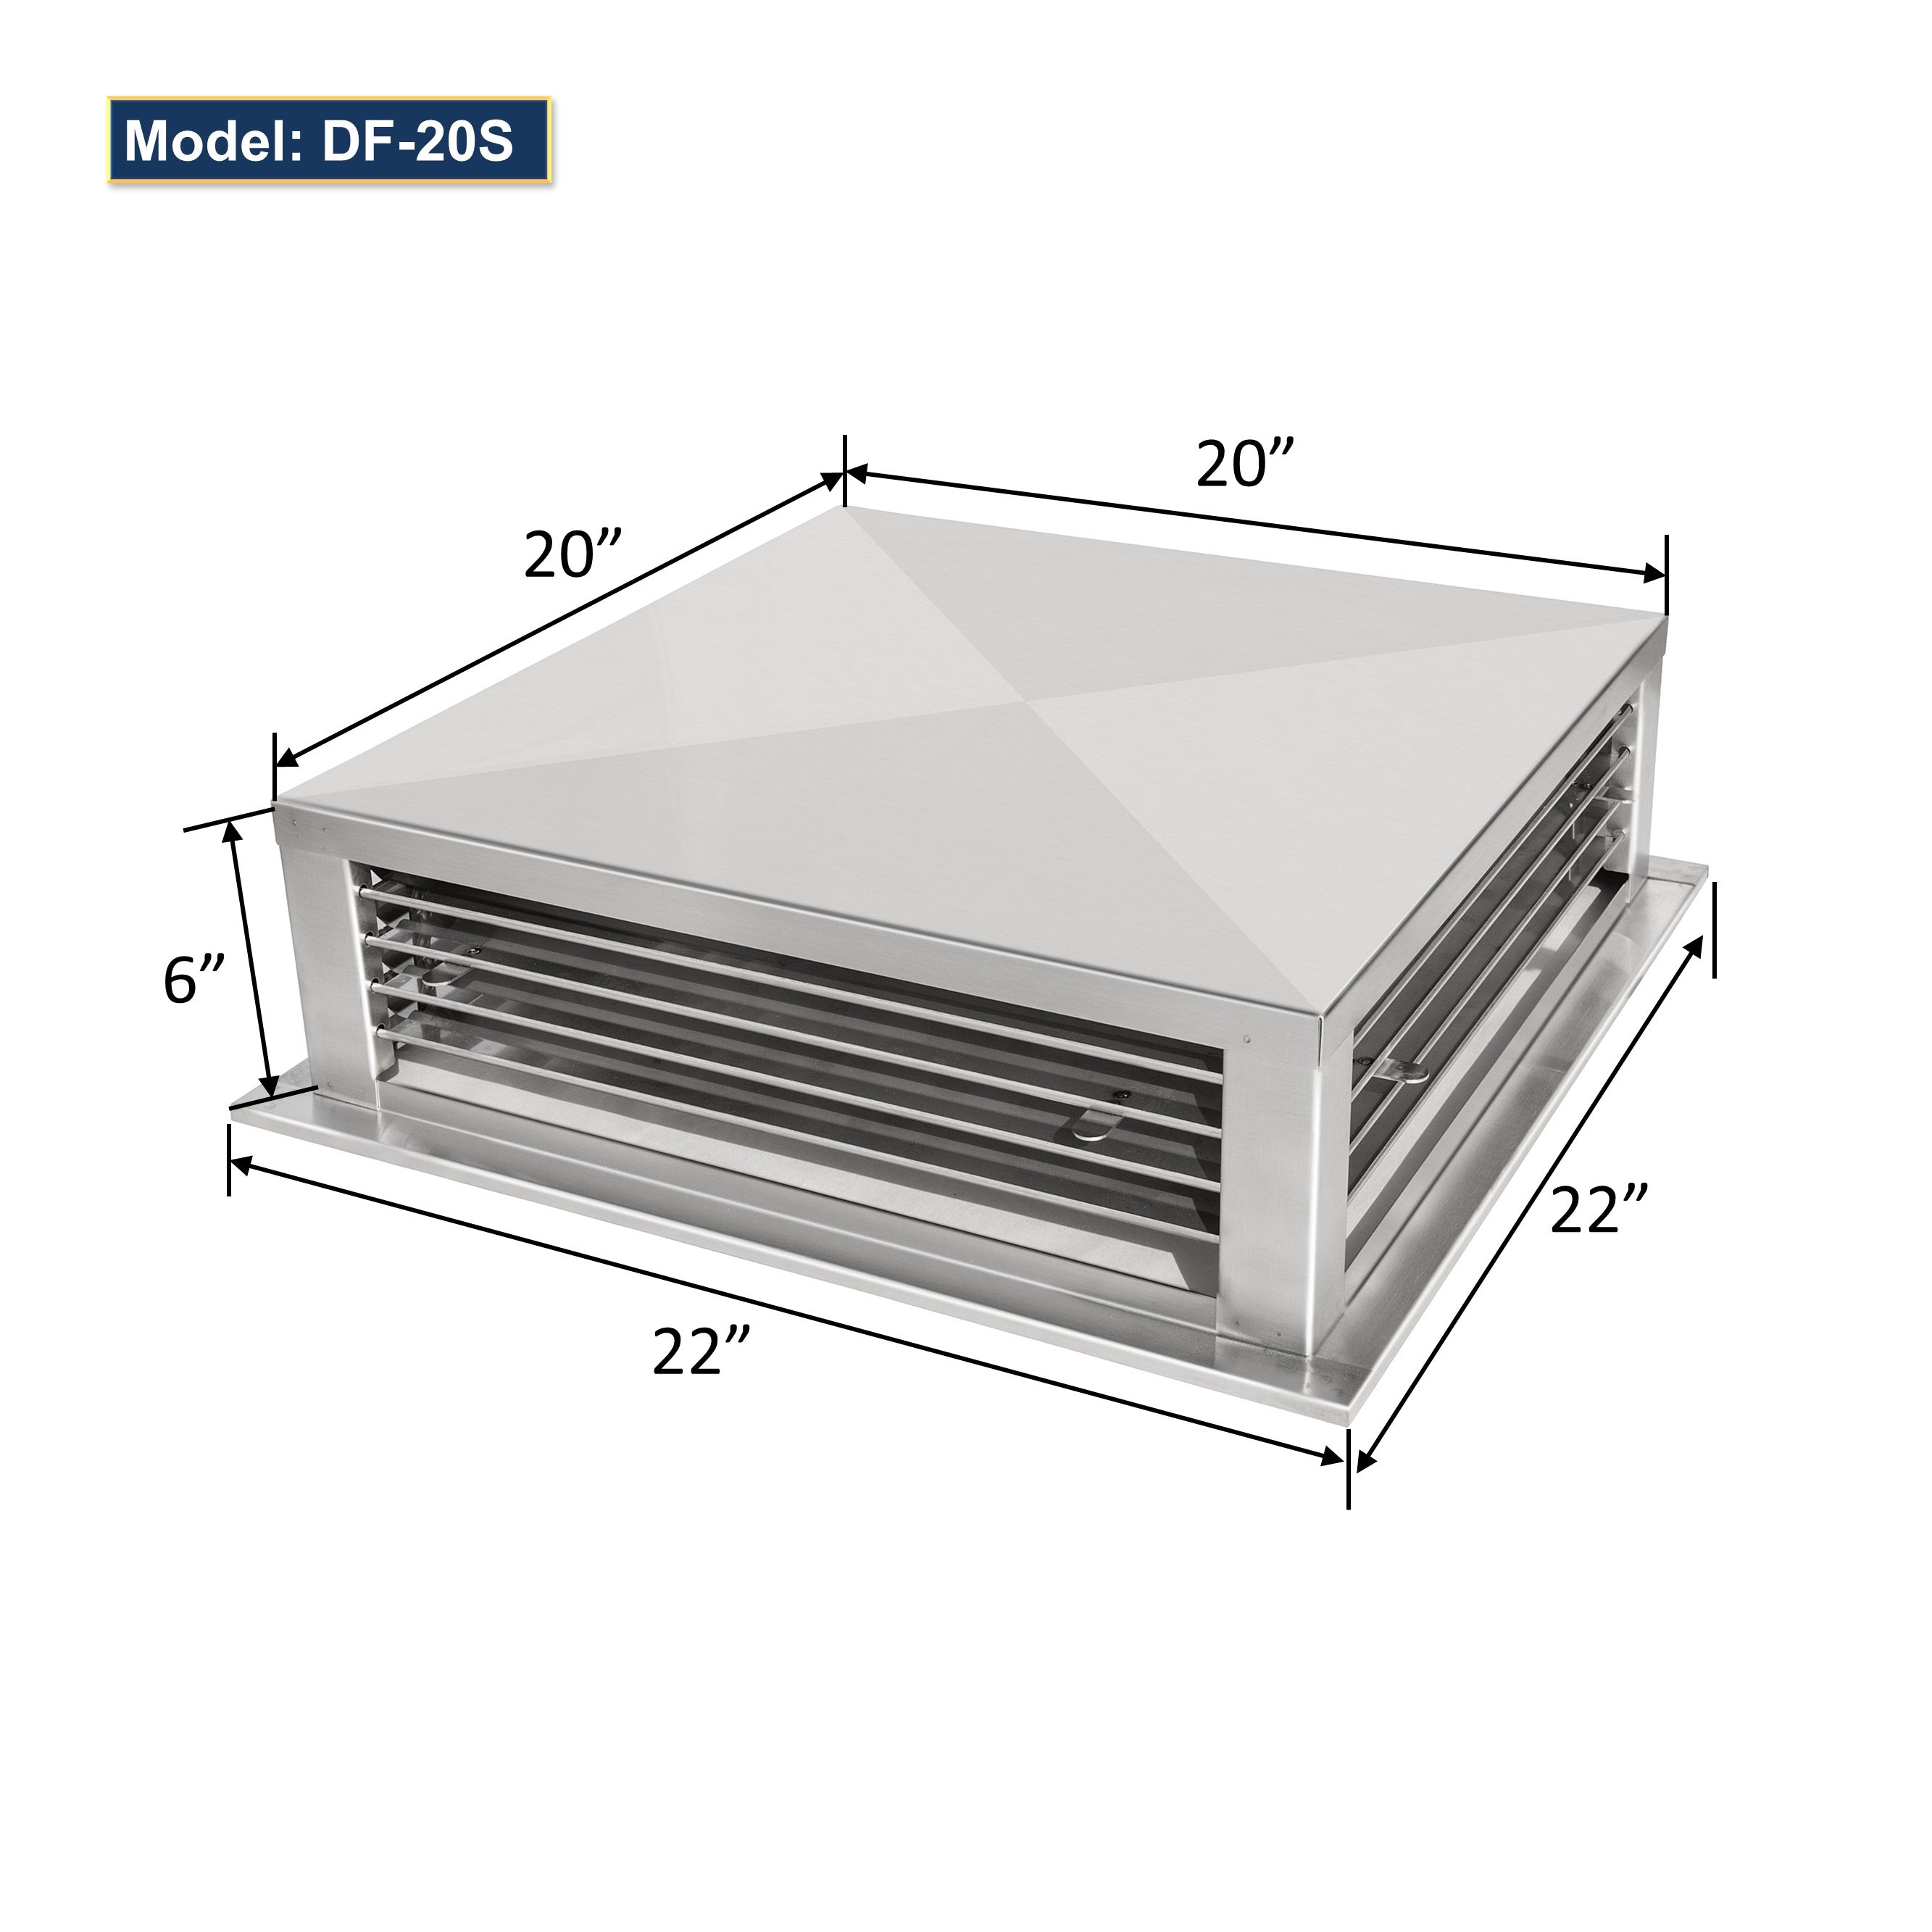 GSW 20” Stainless Steel 4-Way Adjustable Air Diffuser for Evaporative Swamp Cooler, 22” Mounting Edge (20"x20"x6")